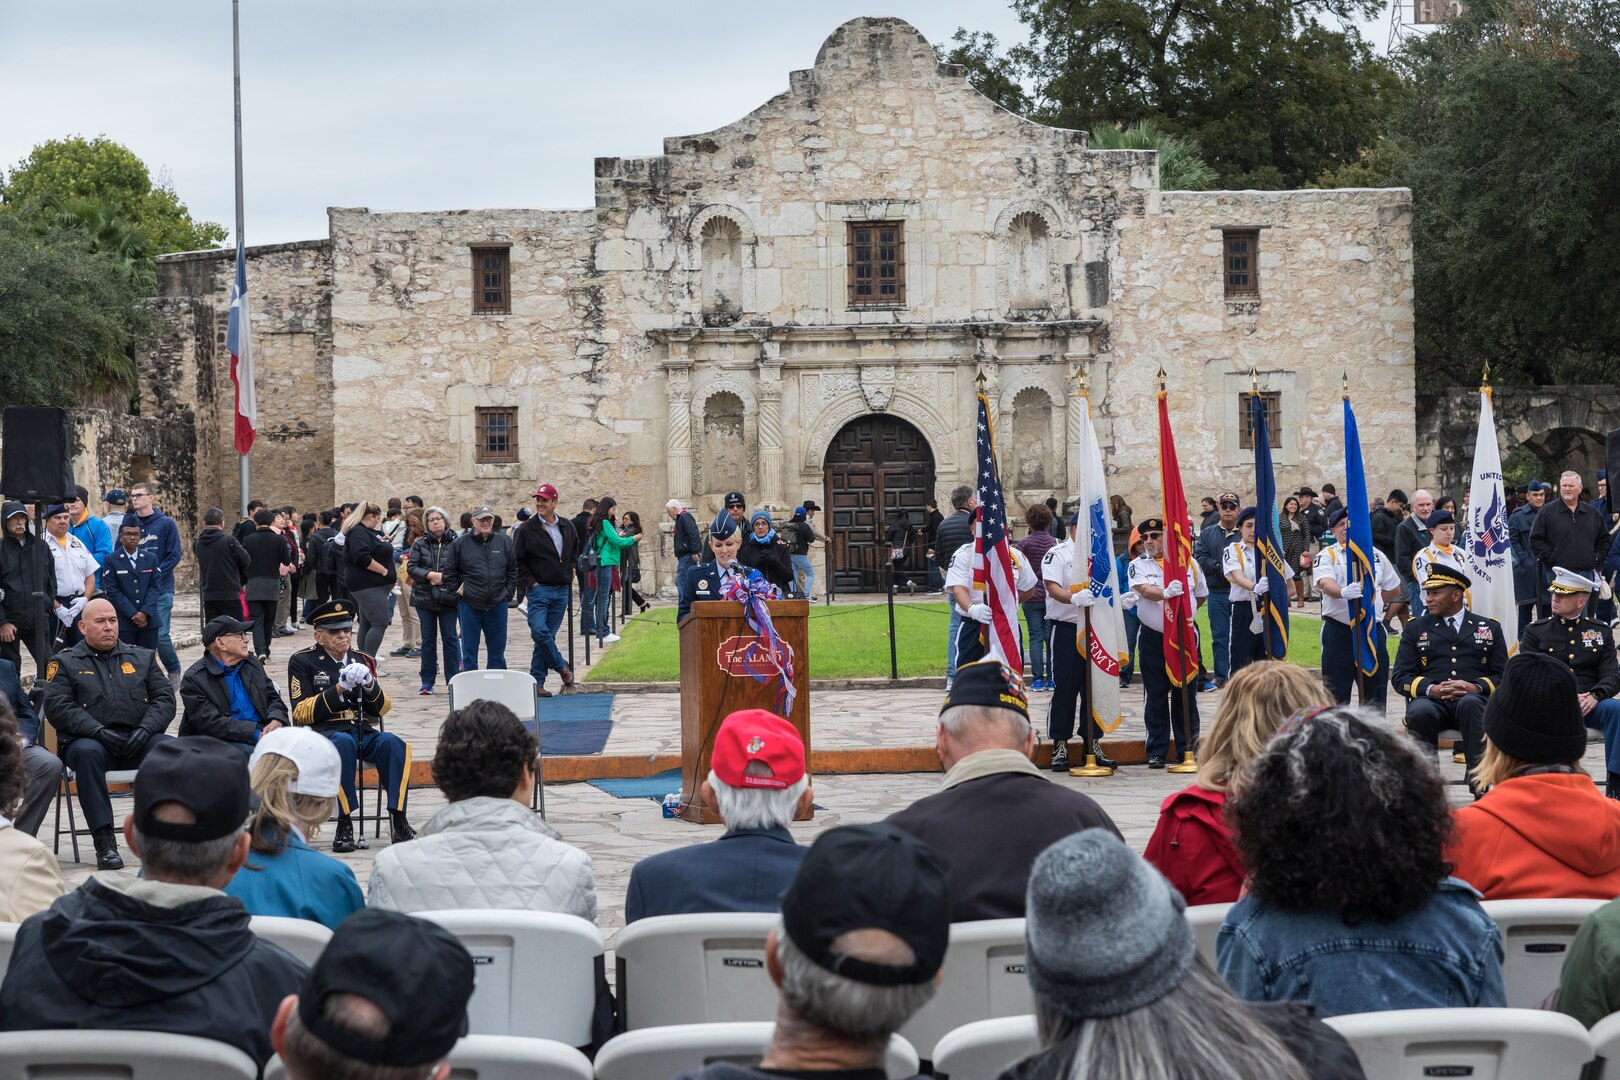 U.S. Air Force Brig. Gen. Laura L. Lenderman, 502d Air Base Wing and Joint Base San Antonio commander, addresses the crowd during a wreath presentation ceremony at The Alamo in San Antonio Nov. 10. The ceremony was part of the Veterans Day parade held to honor veterans and current active duty Soldiers, Airmen, Sailors, Coast Guardsmen and Marines.